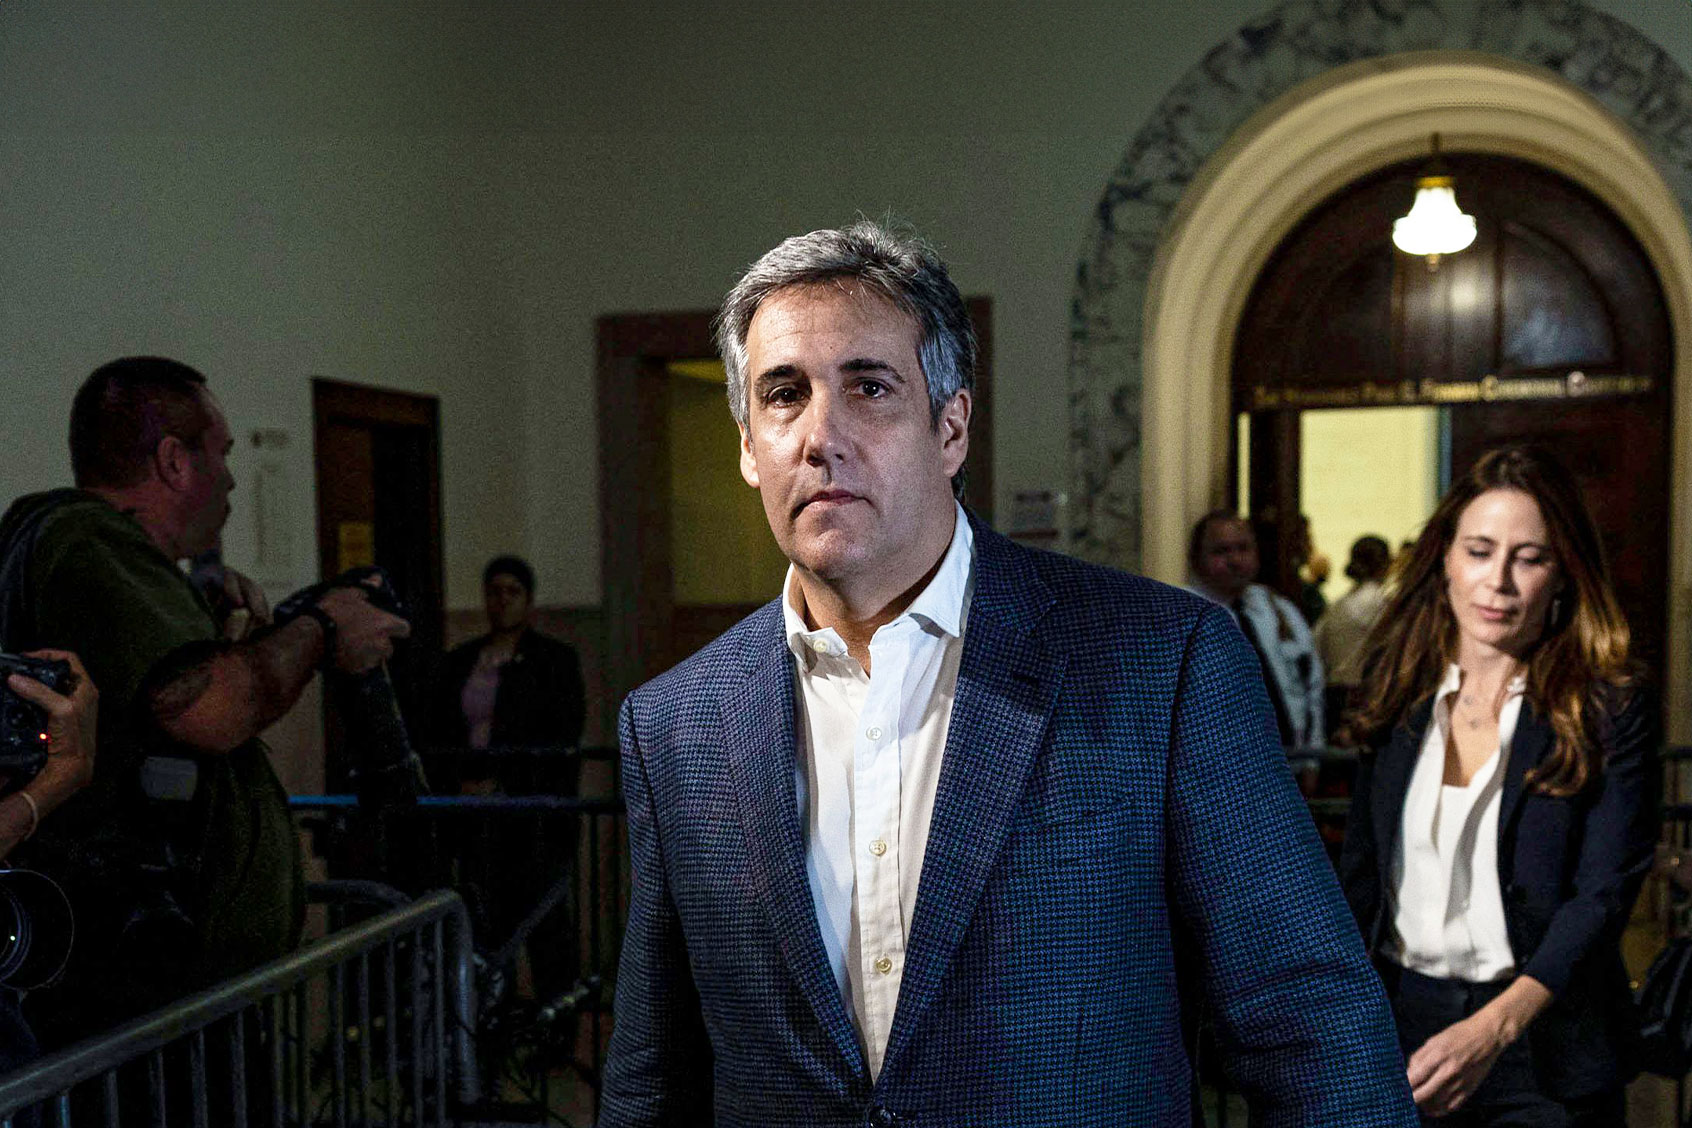 “He doesn’t have it”: Michael Cohen predicts Trump will have to “start liquidating” his assets